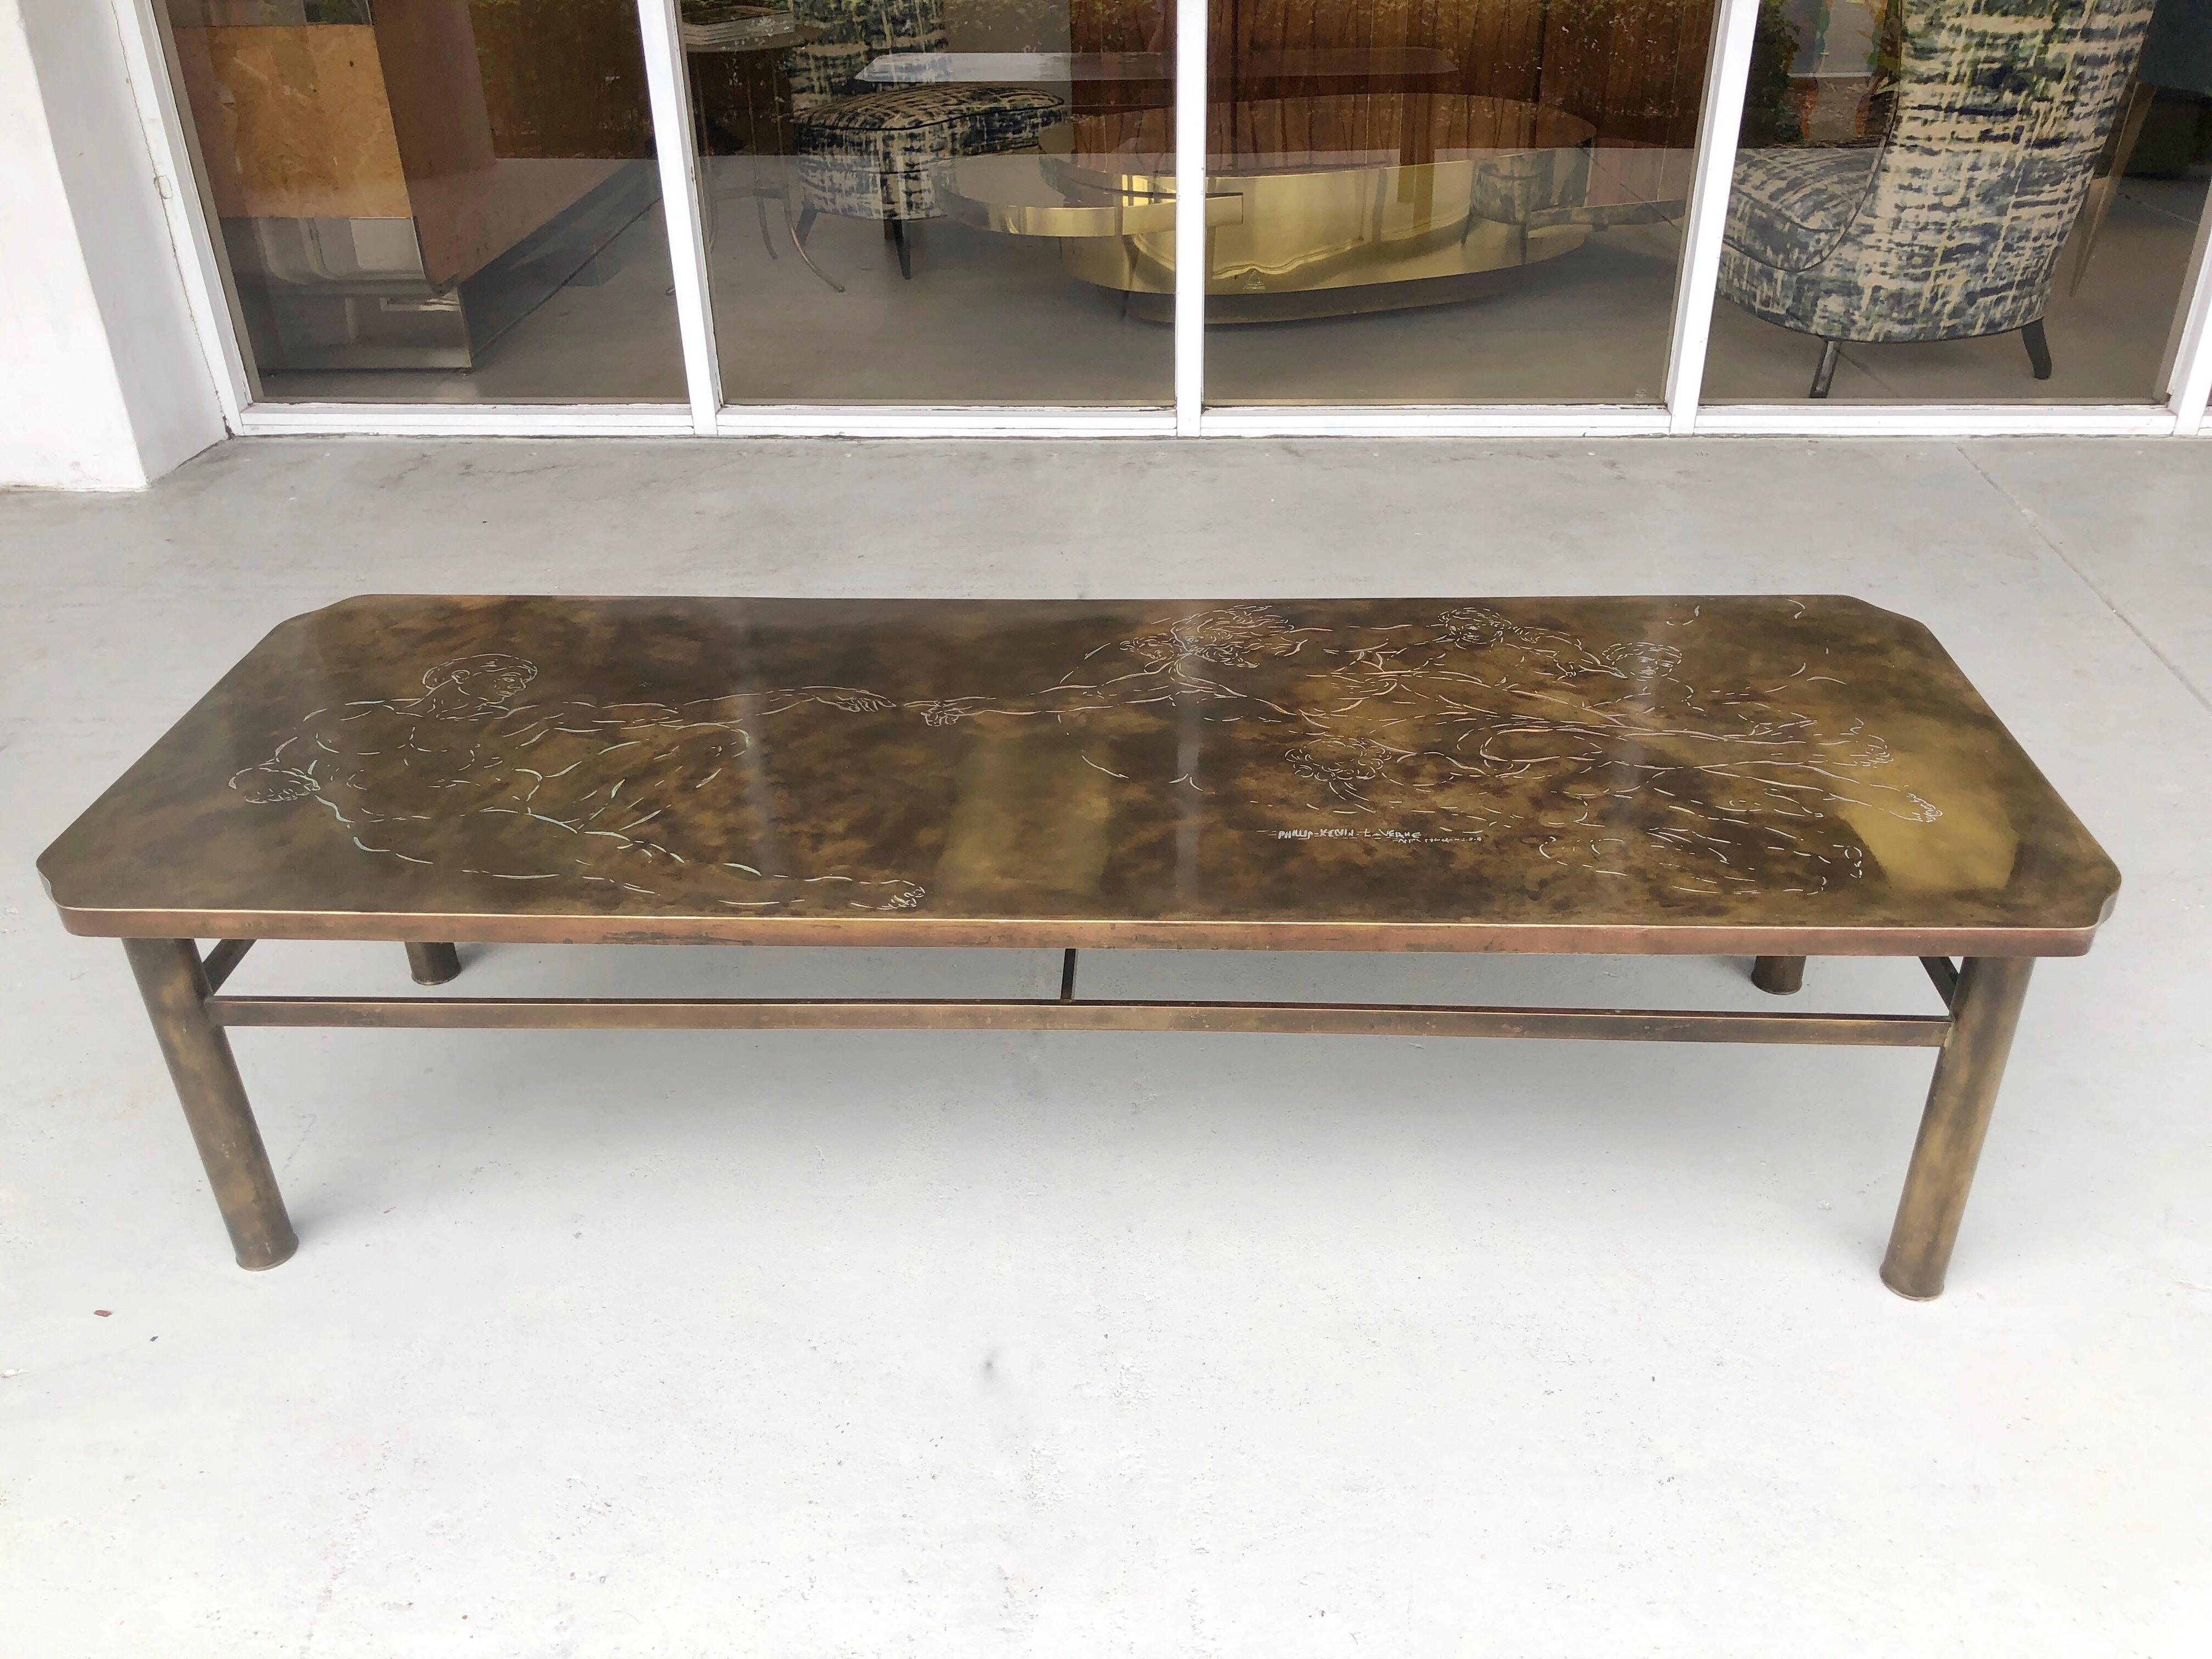 A bronze coffee table by Phillip and Kelvin Laverne. It has etched on the top the Creation of man after Michelangelo's masterpiece.